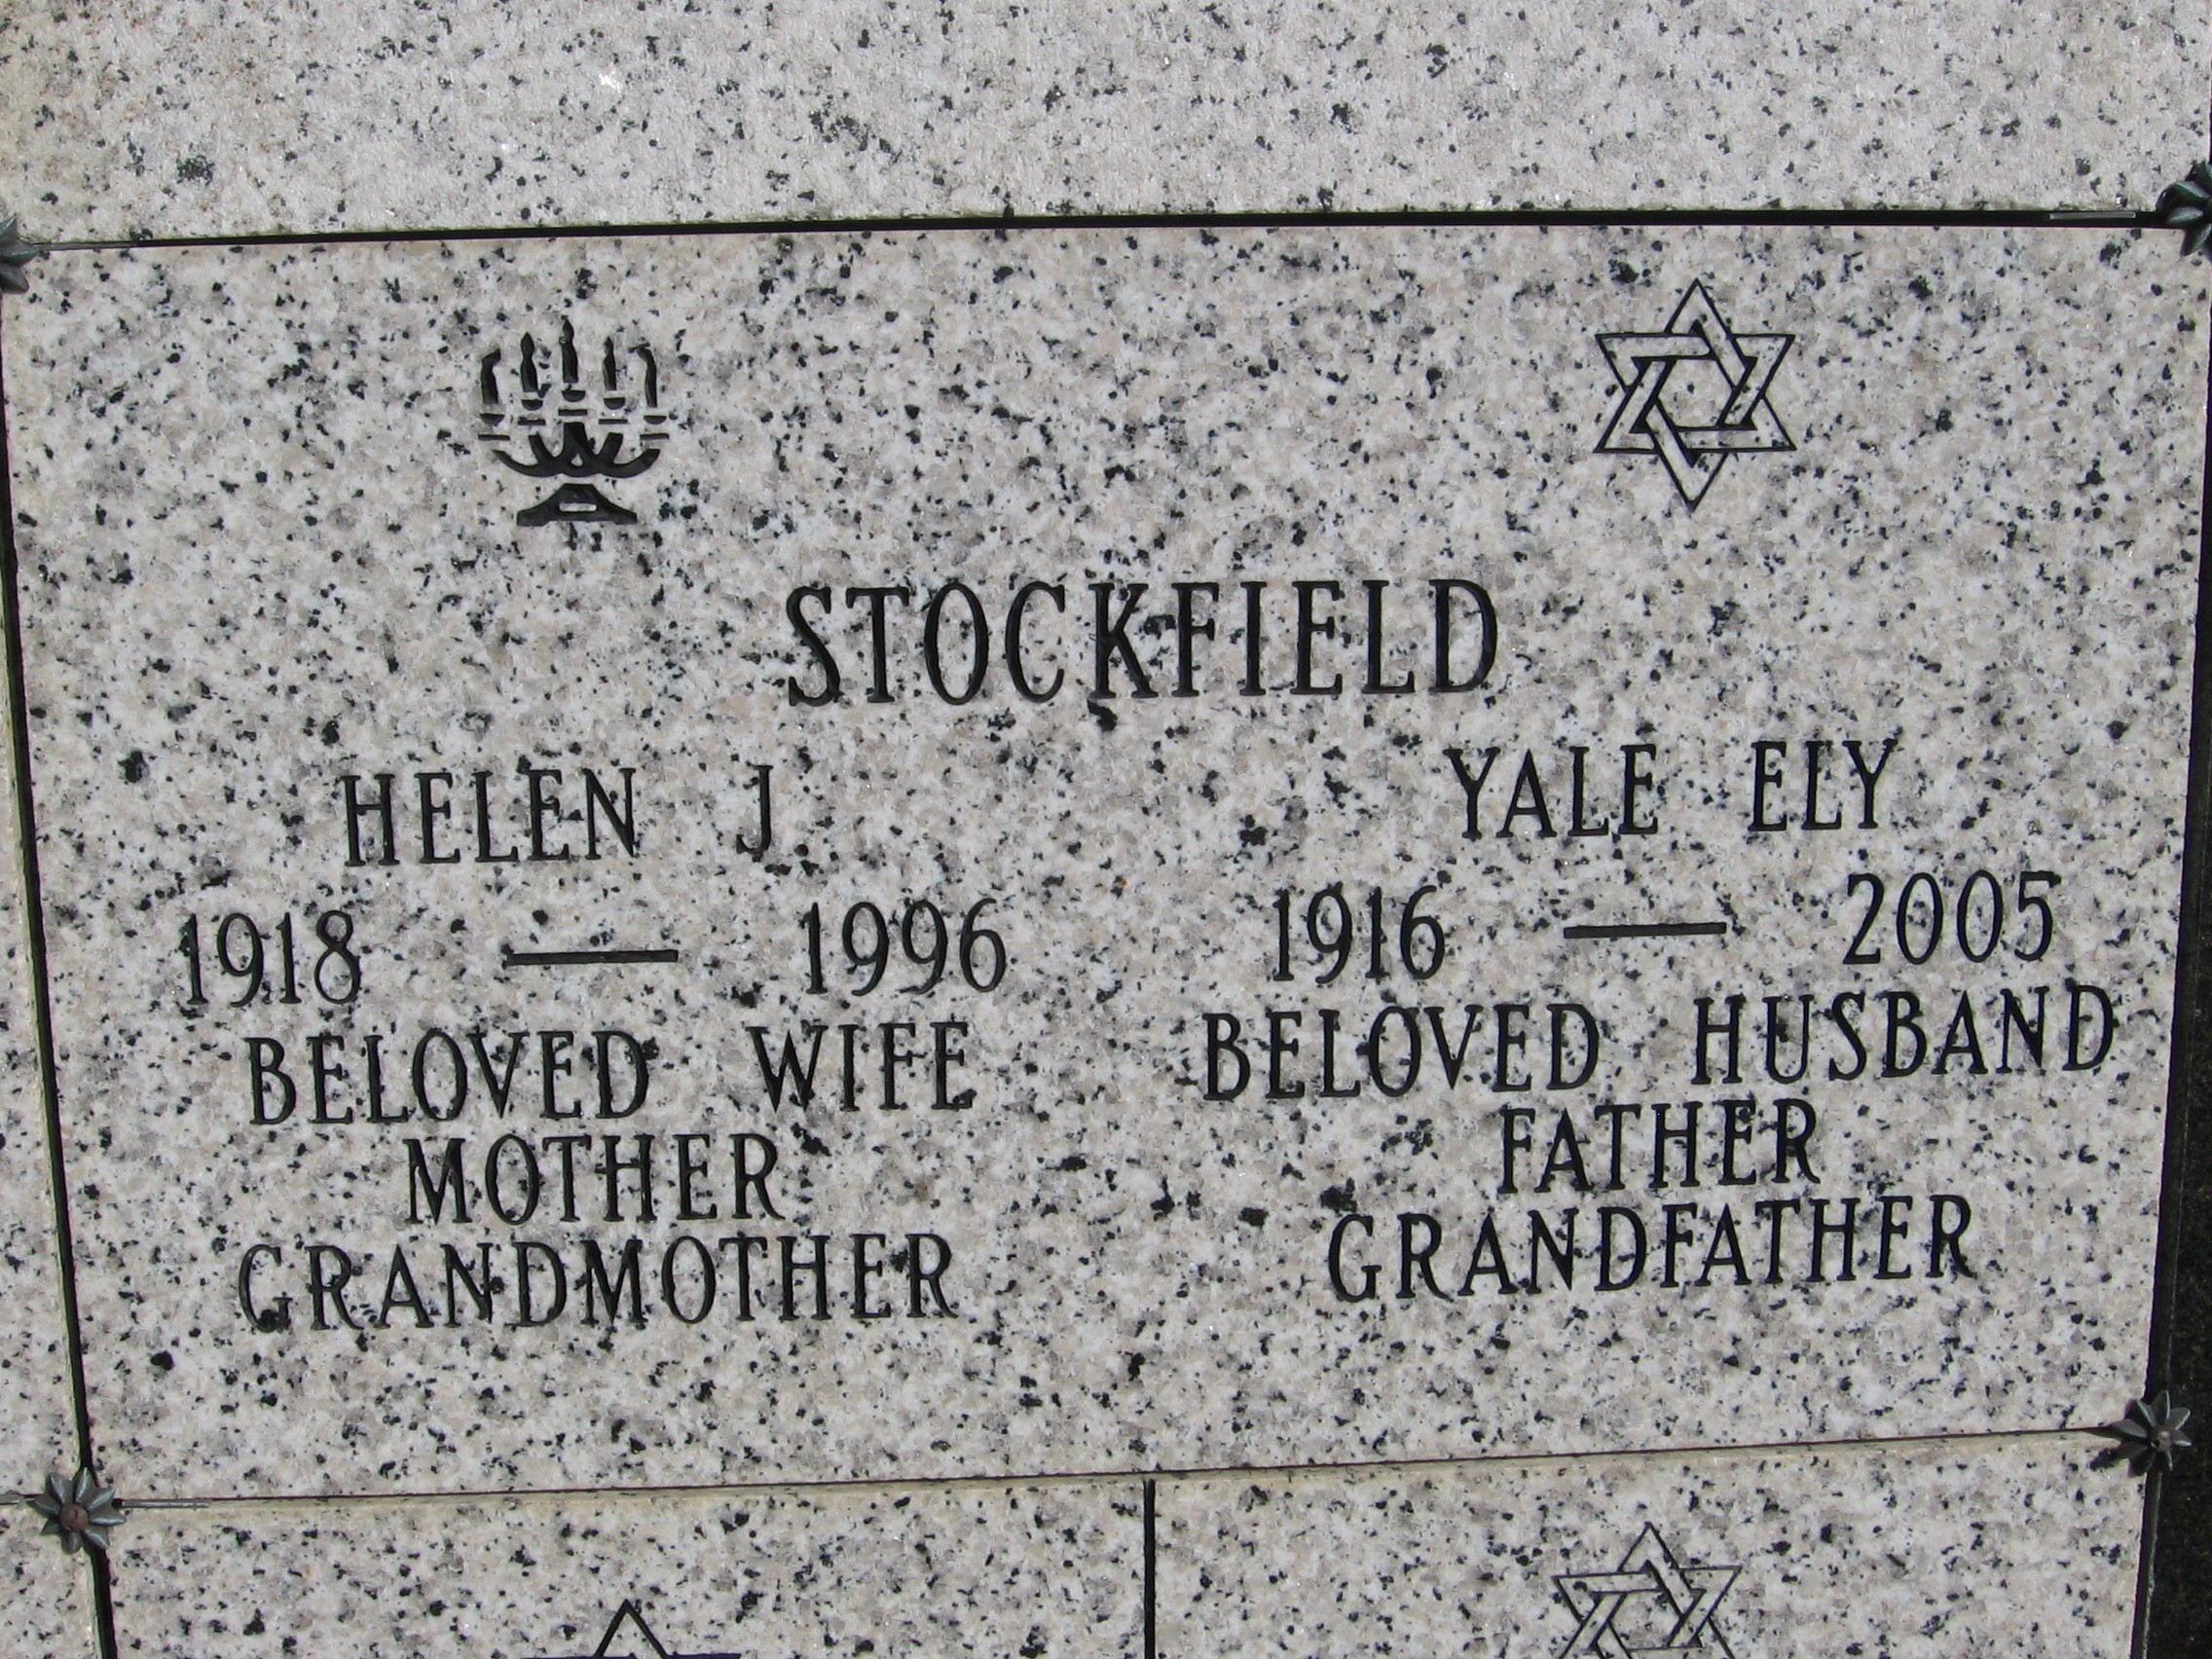 Yale Ely Stockfield